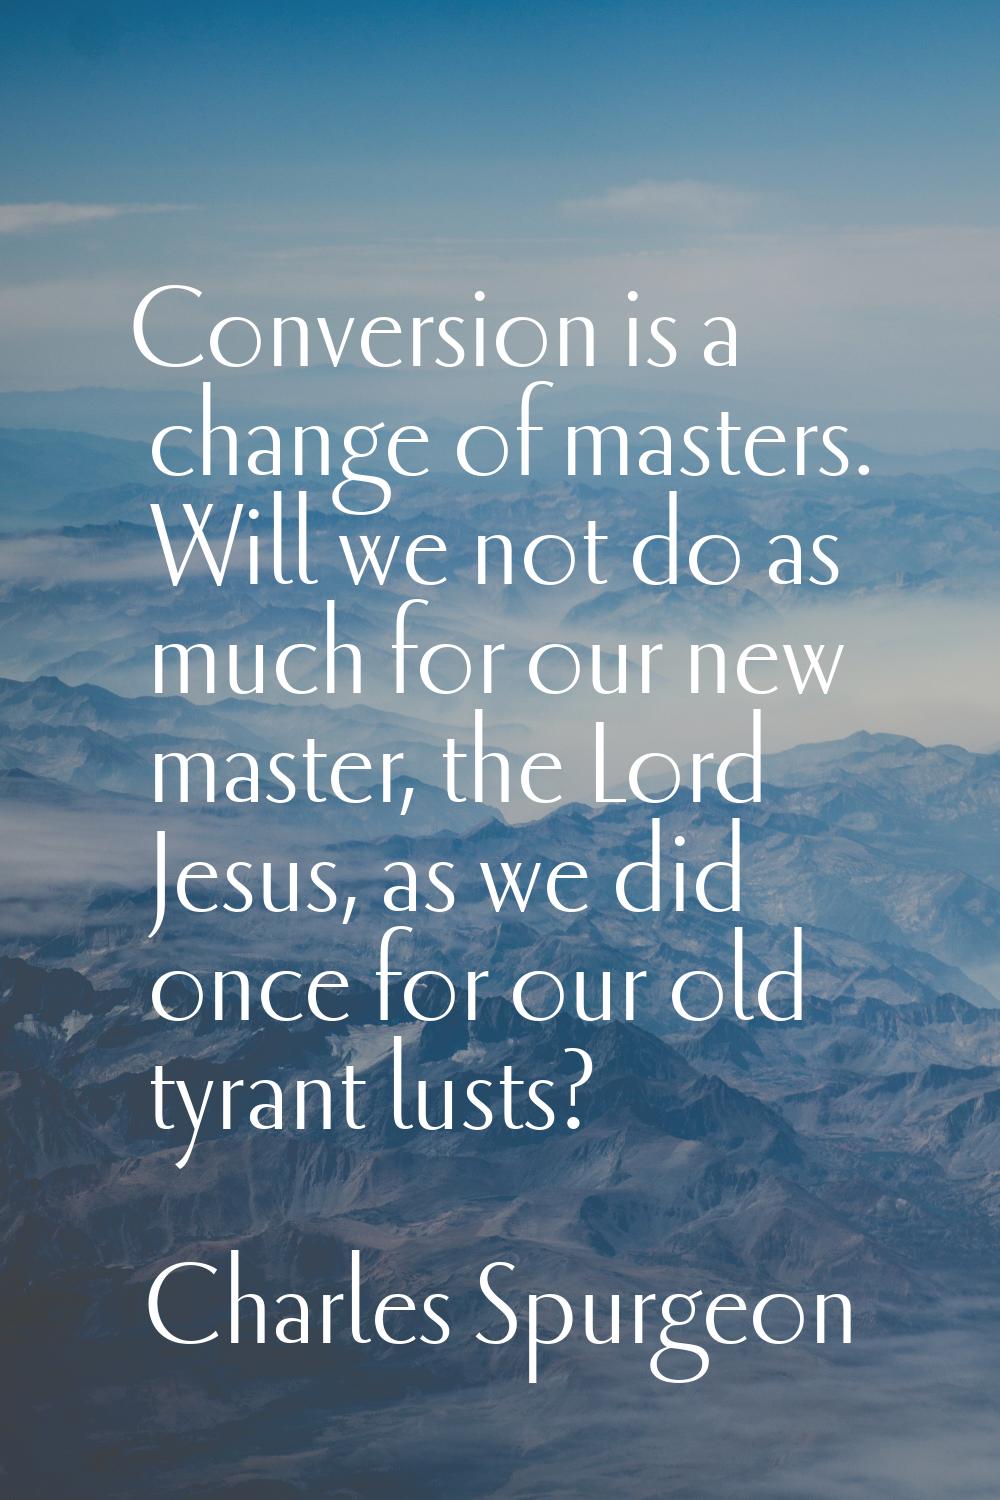 Conversion is a change of masters. Will we not do as much for our new master, the Lord Jesus, as we